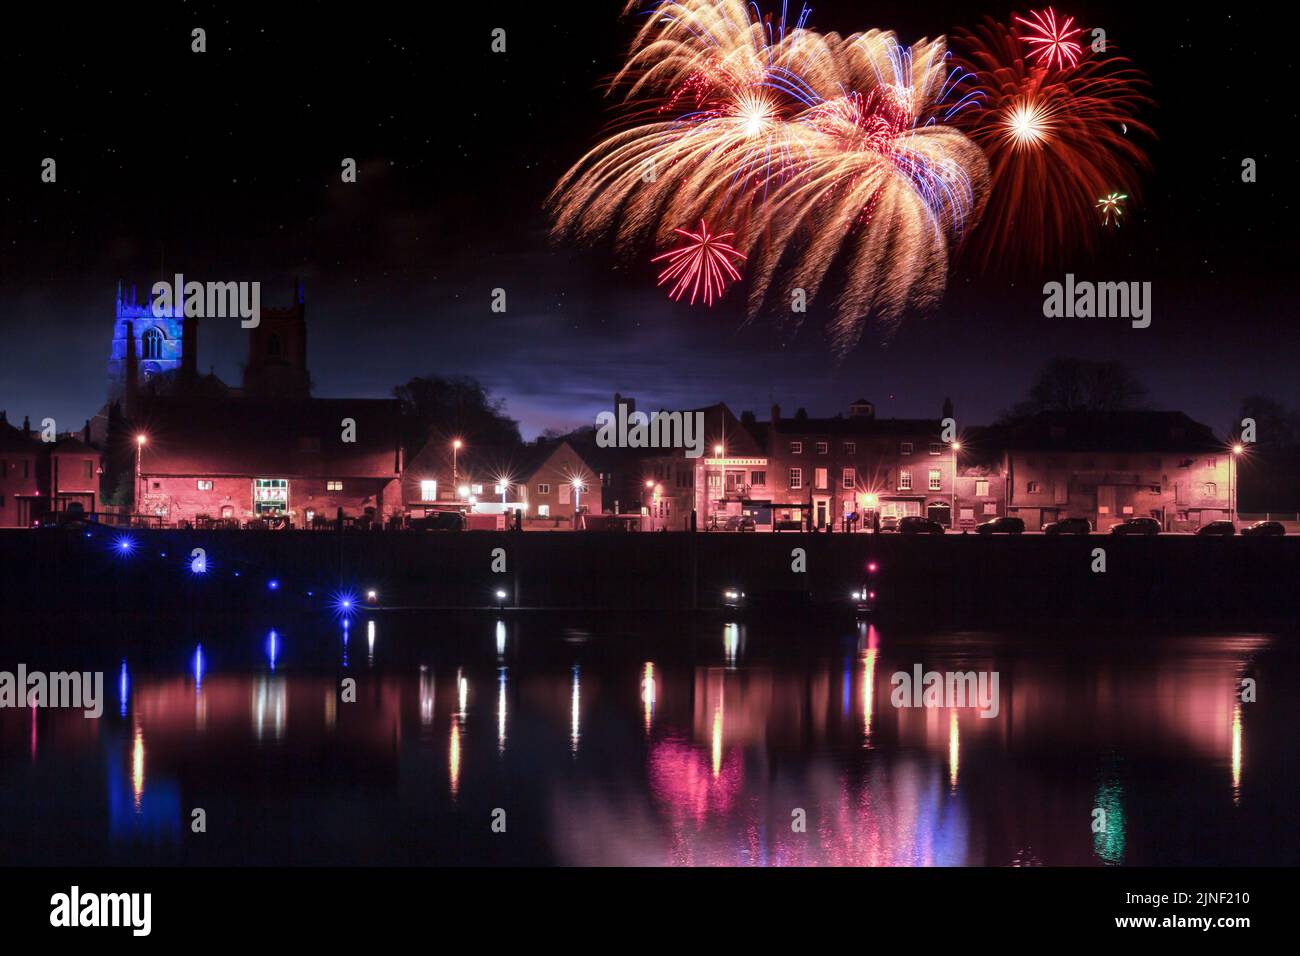 Fireworks at Kings Lynn in Norfolk UK 2018. Rockets exploding in a display over the Great River Ouse at night time. Historic town at night with reflec Stock Photo